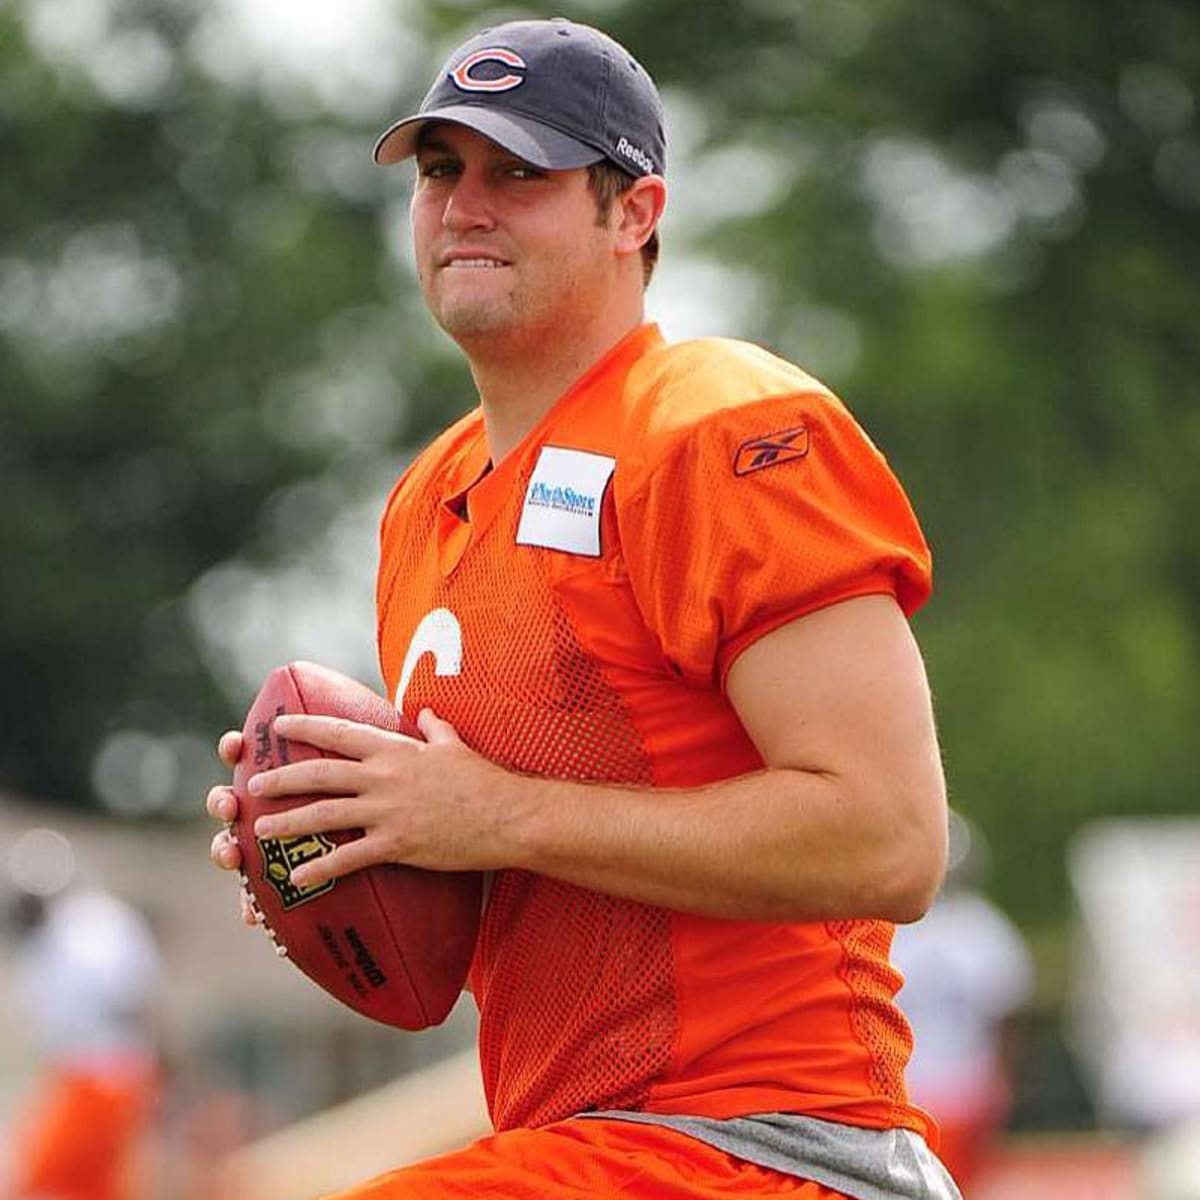 Jay Cutler Says He'd 'Love' Another Opportunity to Have NFL